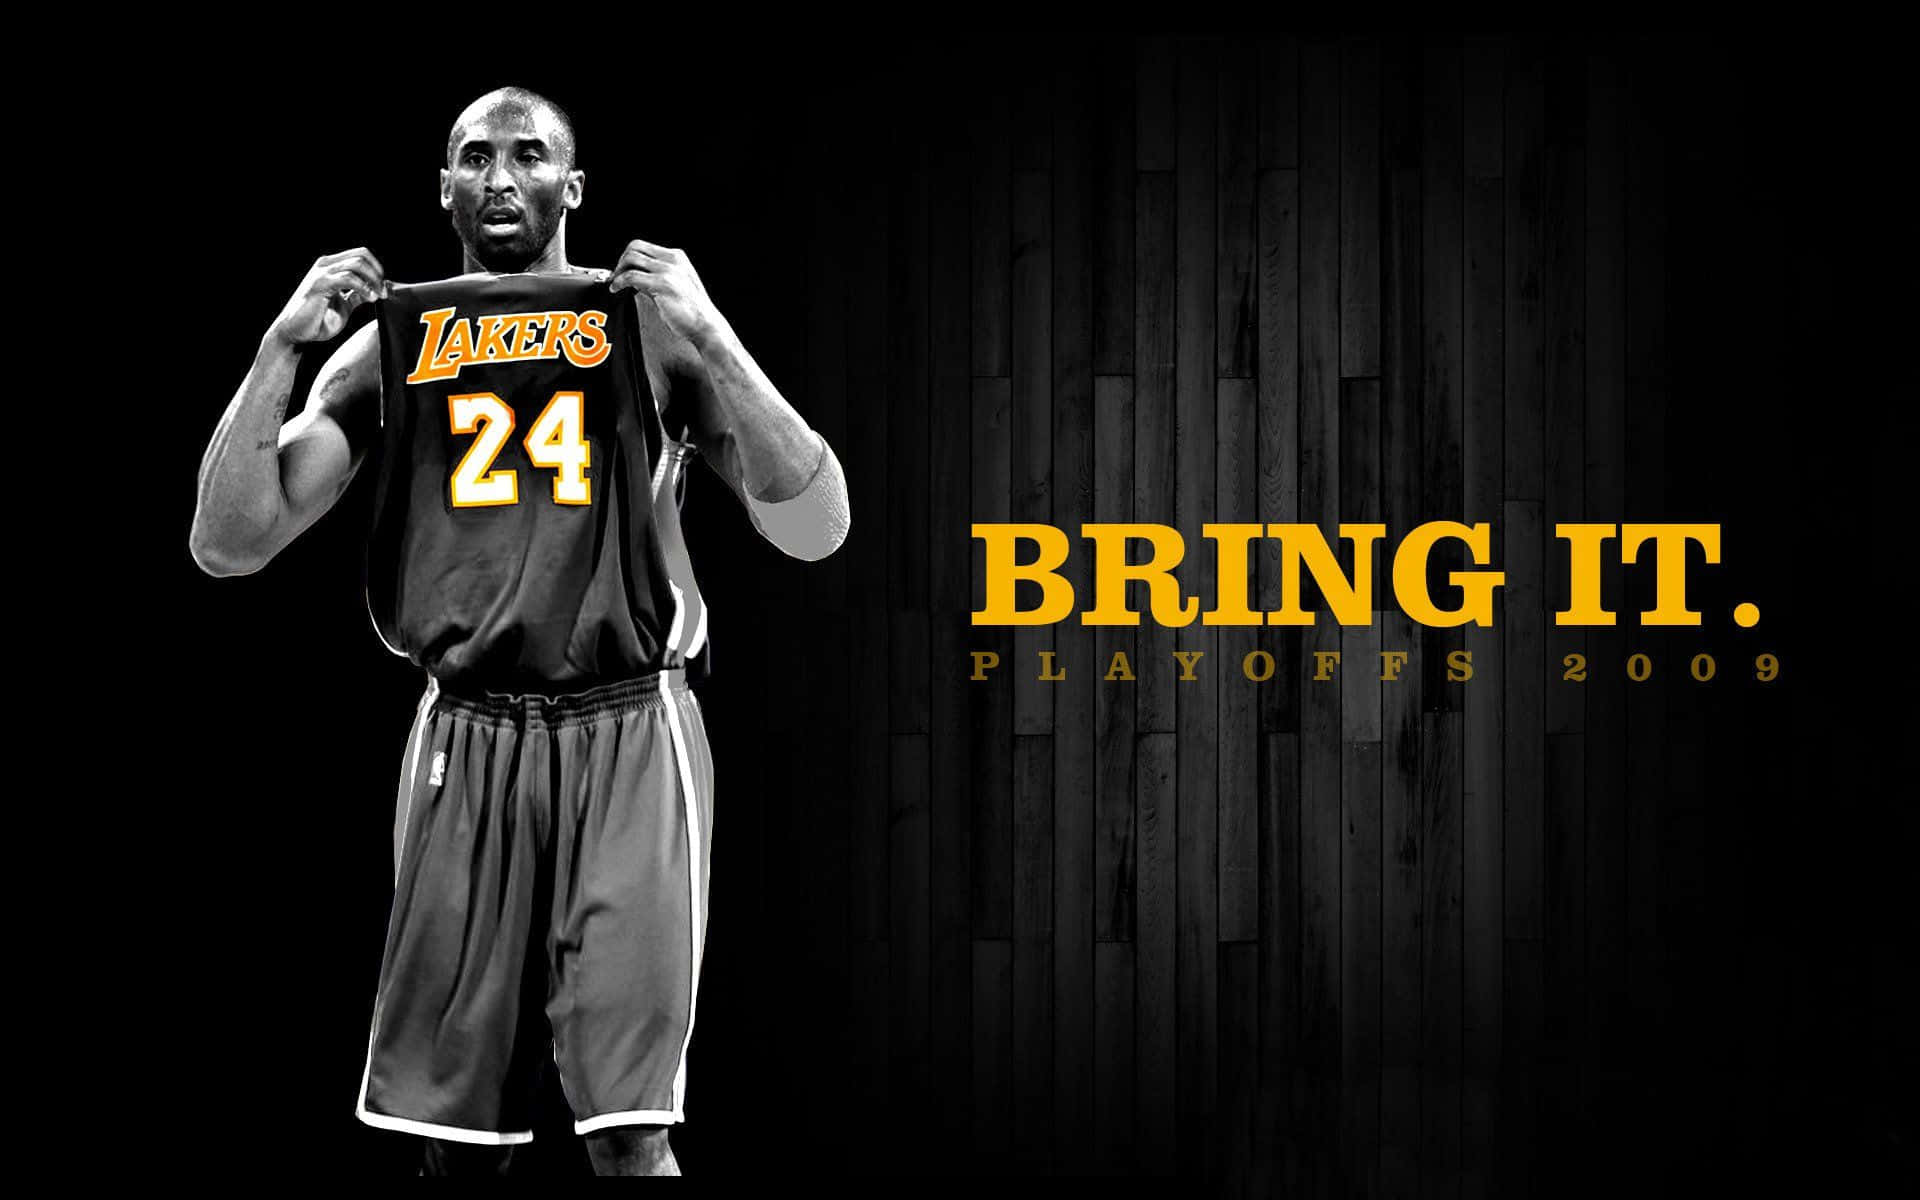 "Two of the Greatest: Lebron James and Kobe Bryant" Wallpaper